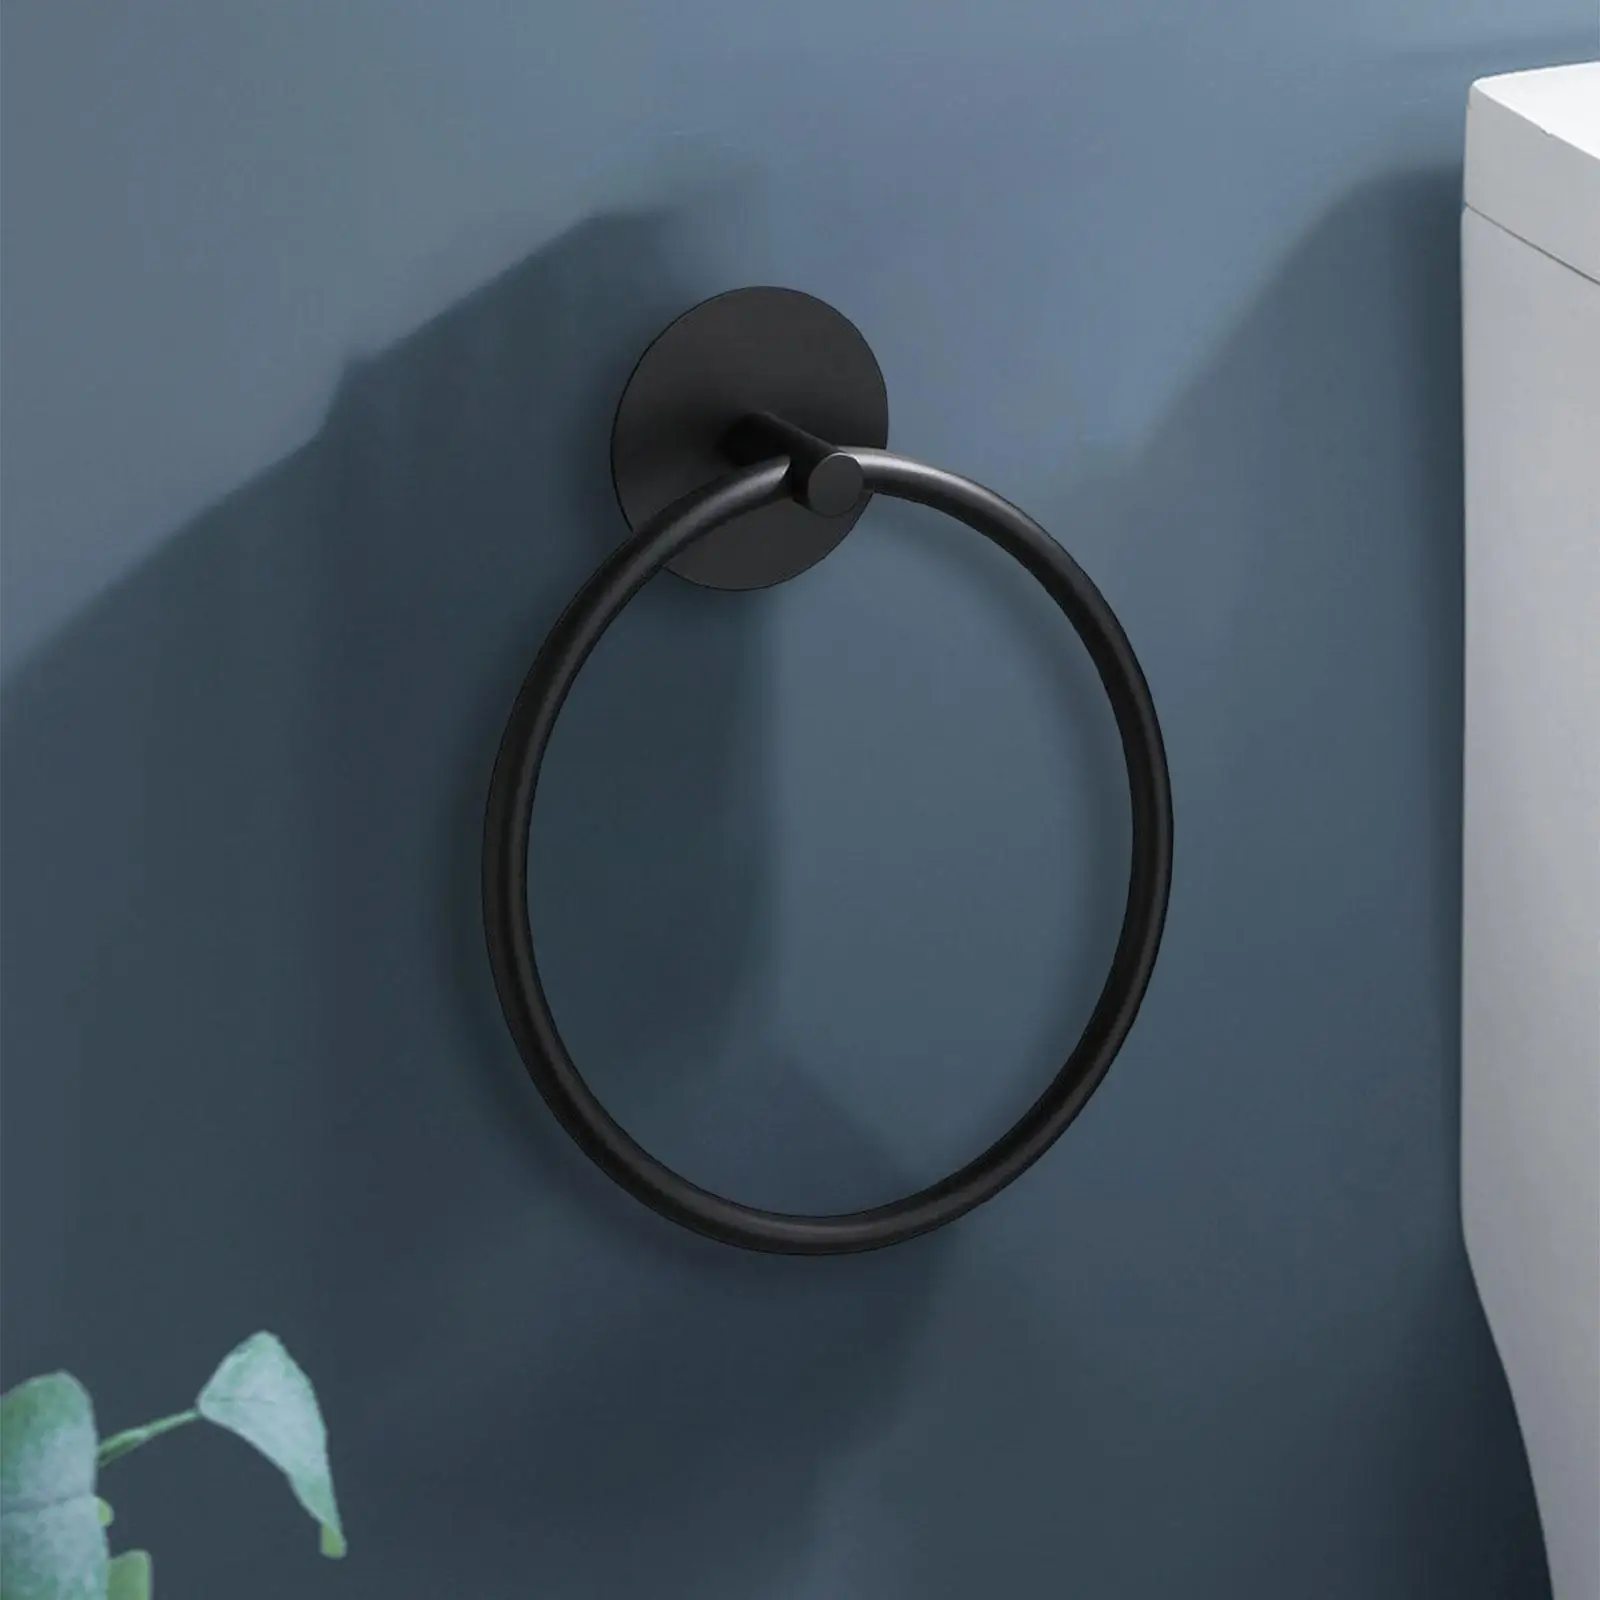 Simple Towel Ring Towel Holder Wall Mounted Stainless Steel Rack Hanger Storage Bath Round Circle for Hotel Kitchen Accessories